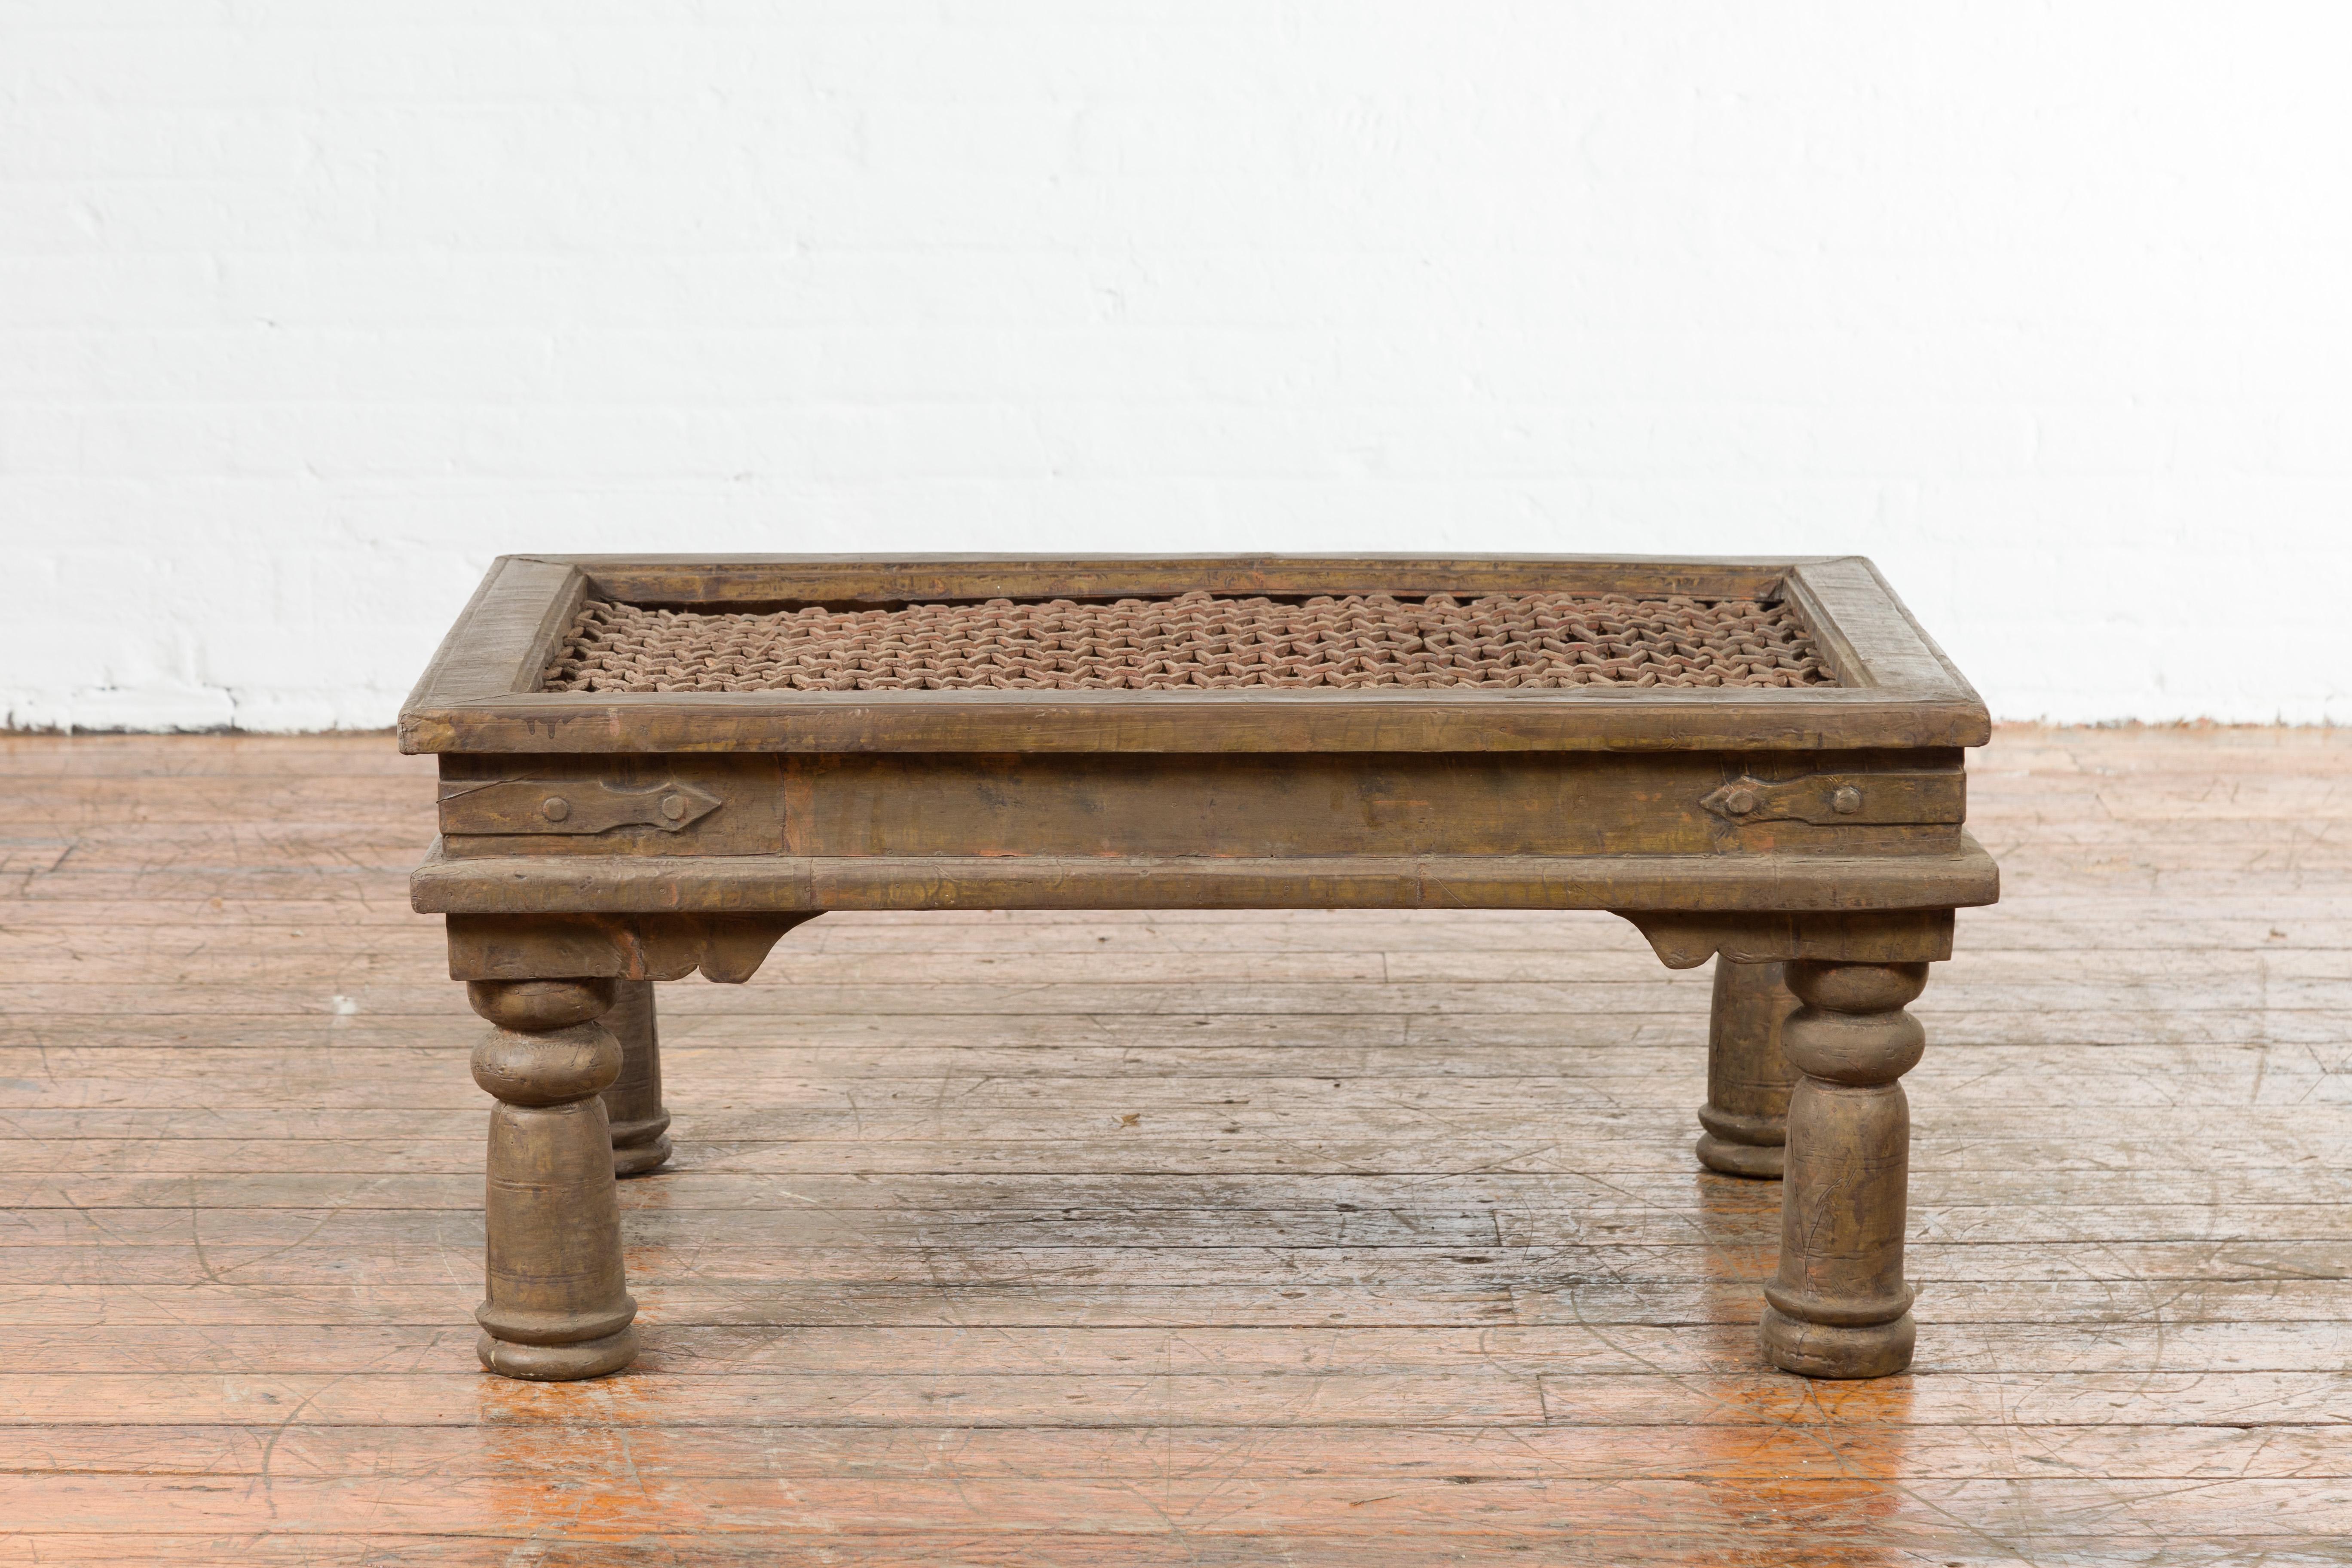 An Indian metal coffee table made of an antique brass window grill with iron geometric design top. Created in India during the early years of the 20th century, this Indian window grill with geometric patterns is resting on four turned baluster-type